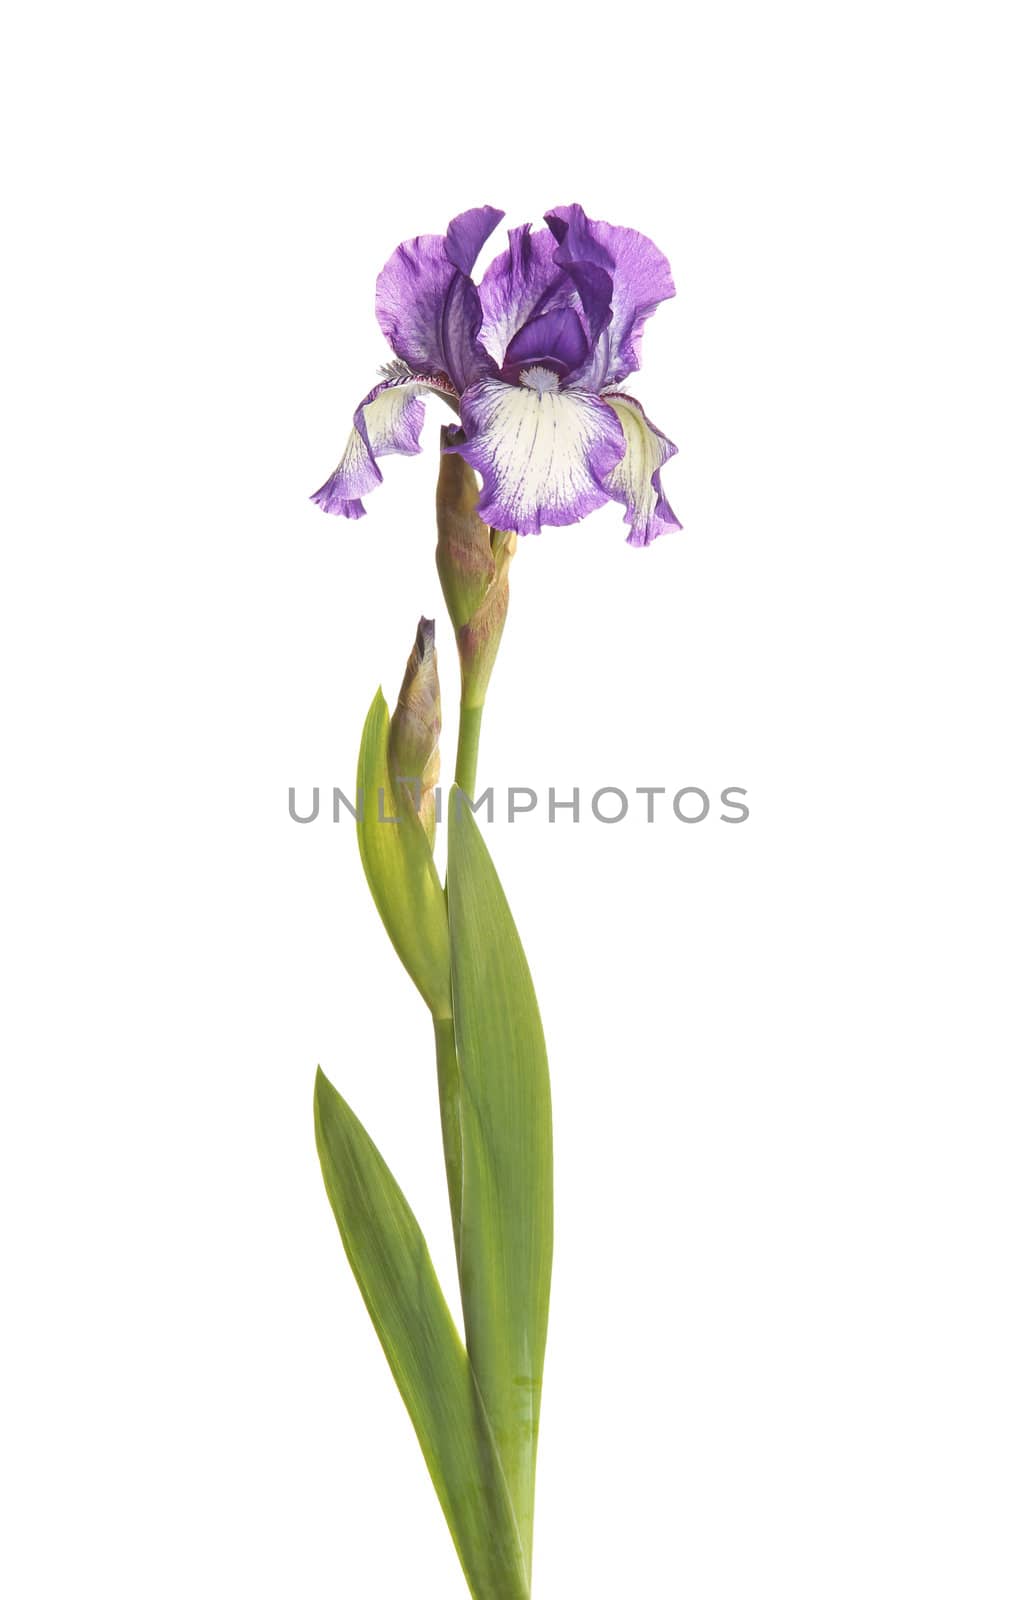 Stem with a purple and white plicata flower of bearded iris (Iris germanica) and two unopened buds isolated against a white background